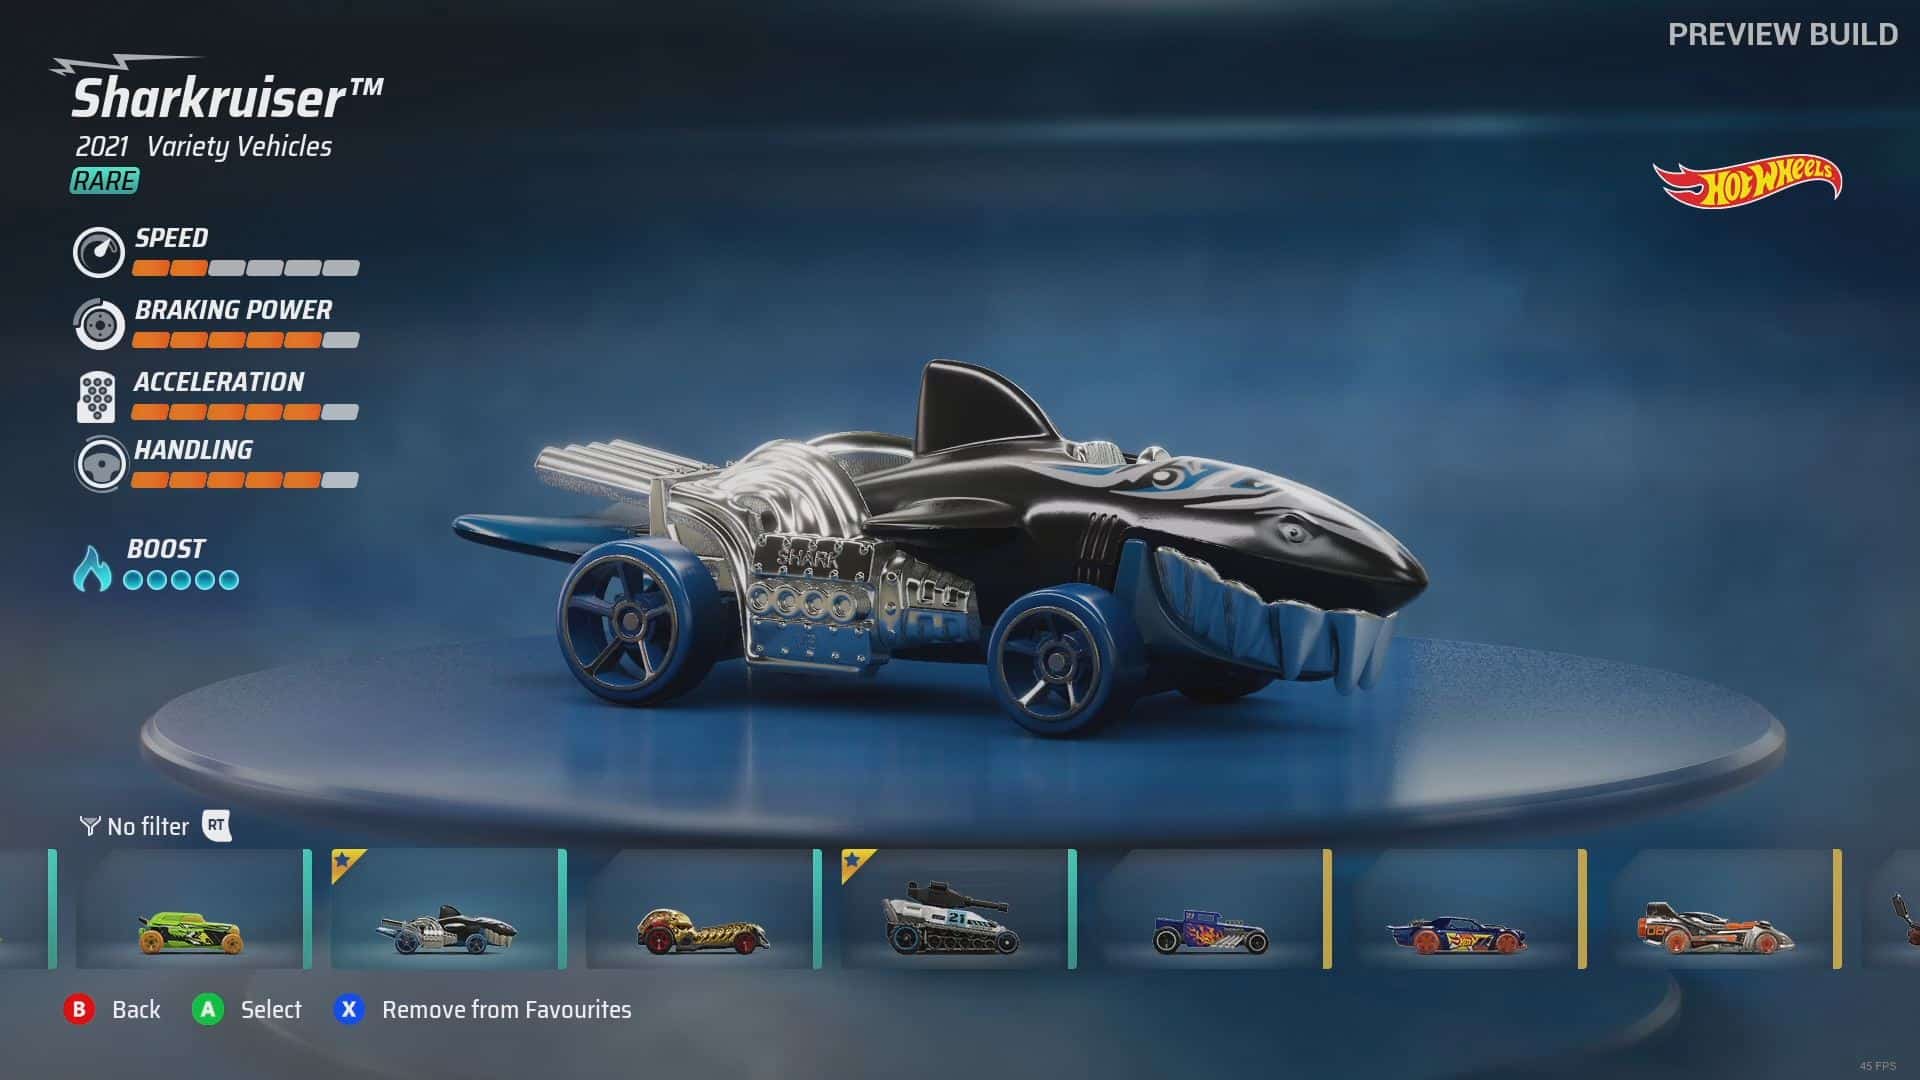 hot wheels unleashed cost